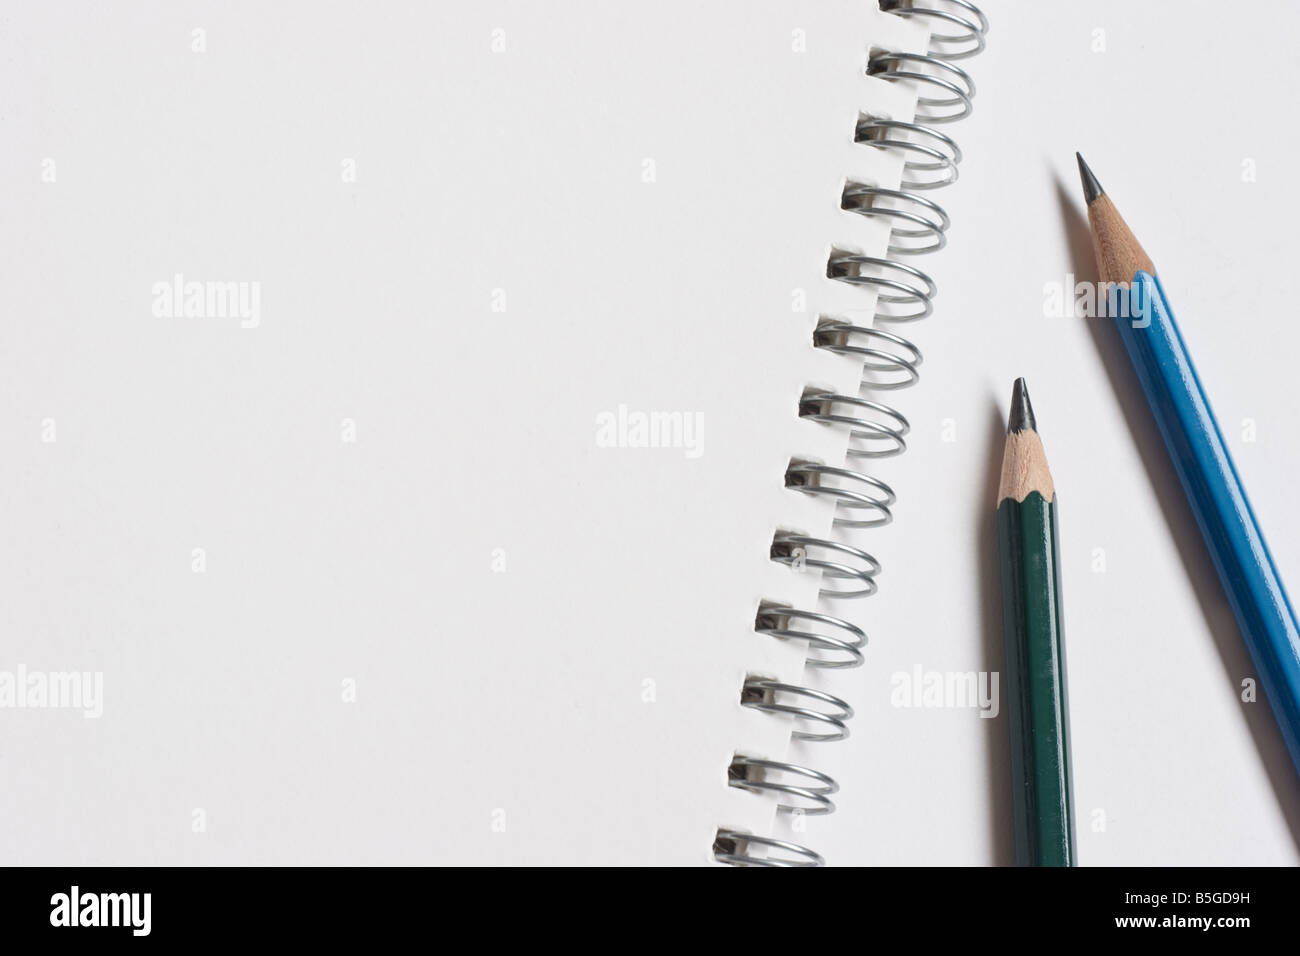 Spiral sketch pad and color pencils template image. Good copy space. Back  to school, homework, hand drawing artist concept Stock Photo - Alamy